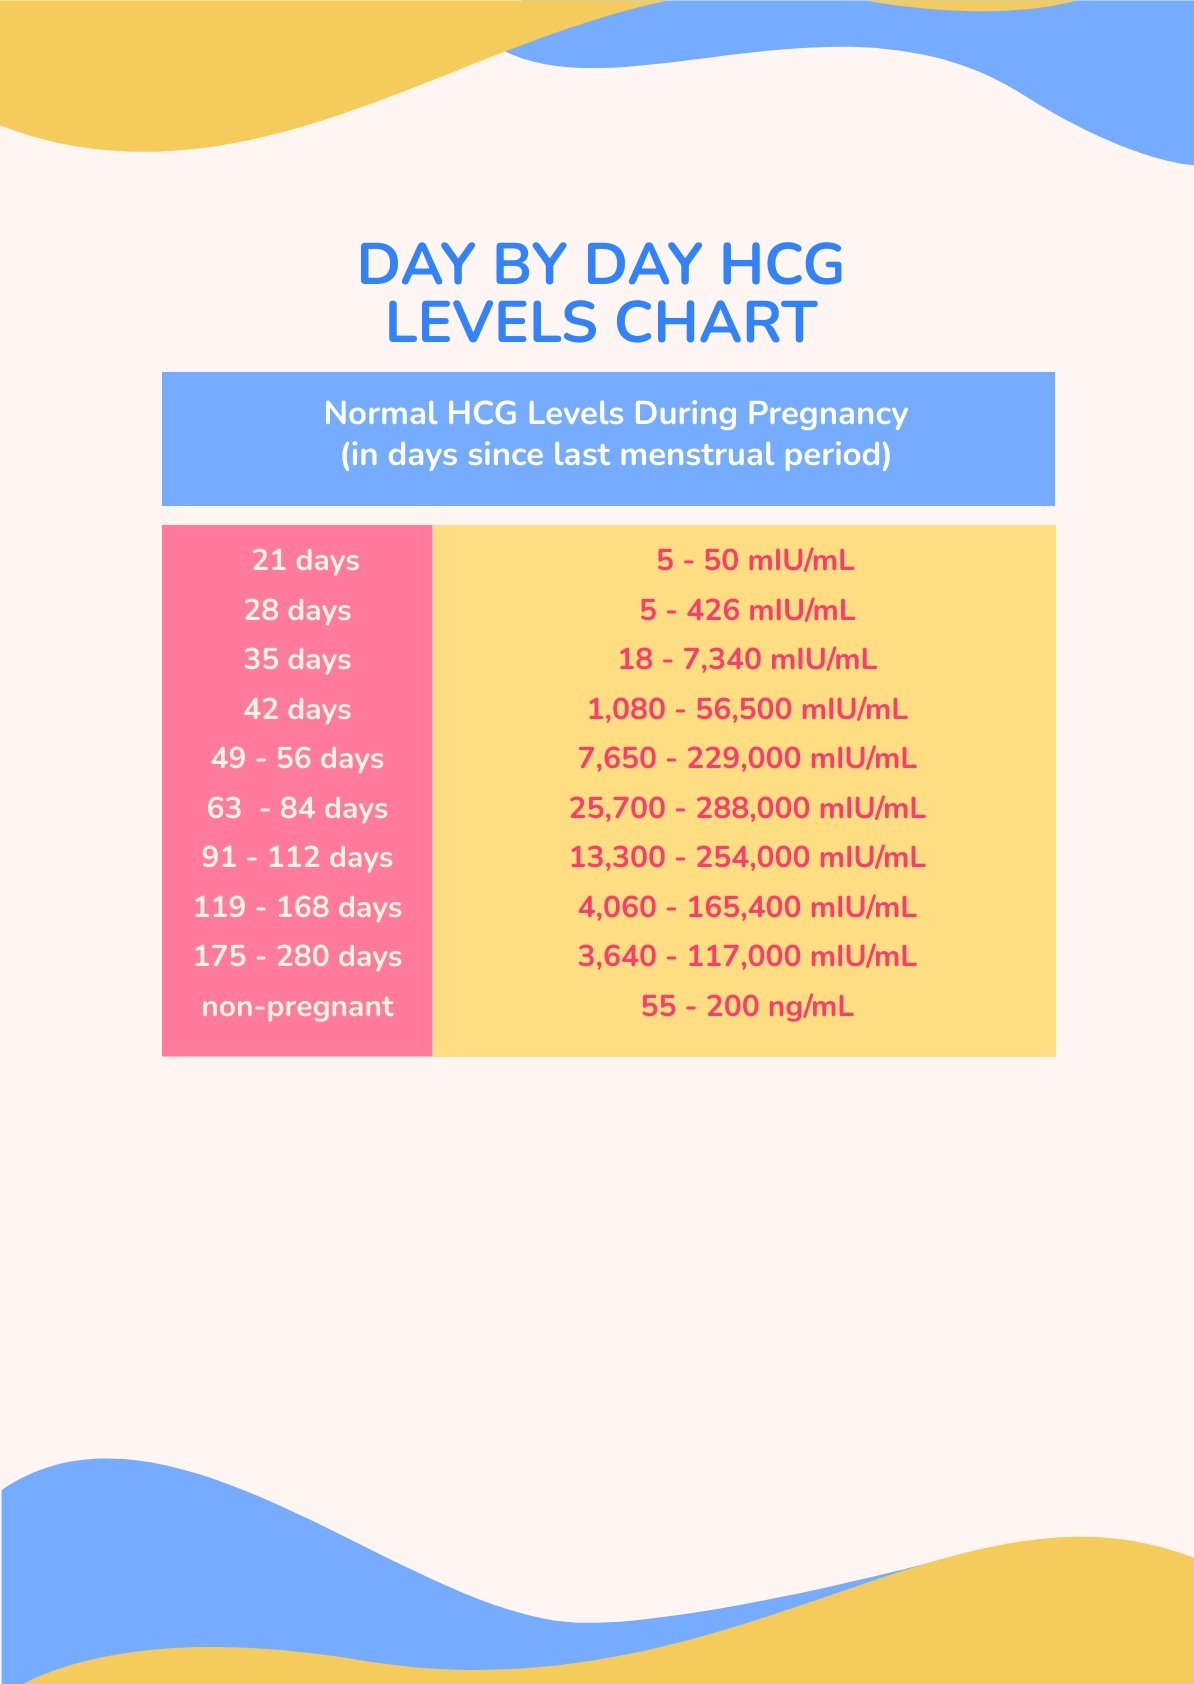 Day By Day HCG Levels Chart